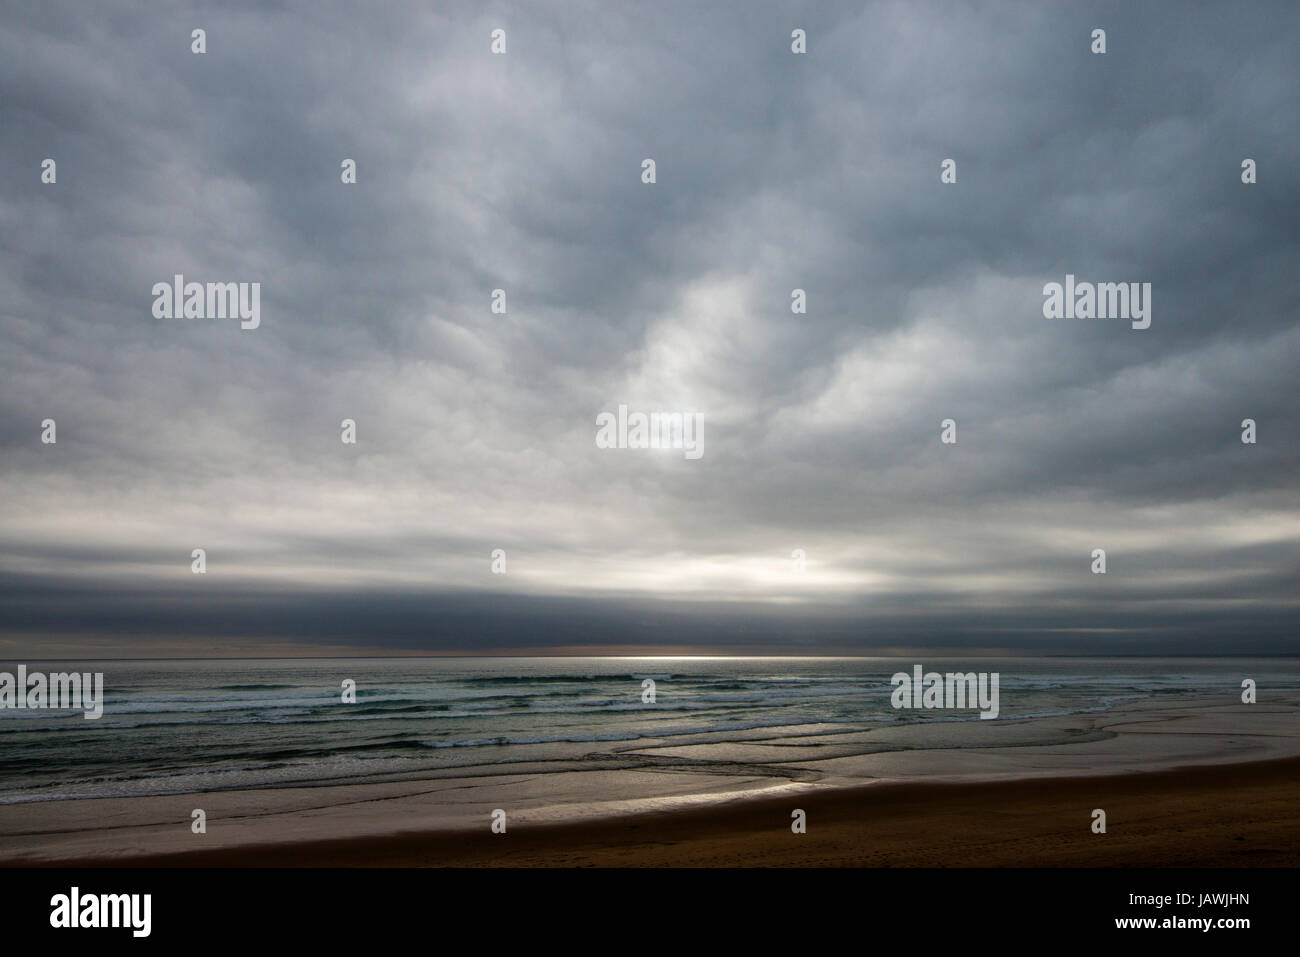 Grey clouds hang over a deserted beach on a stormy day. Stock Photo